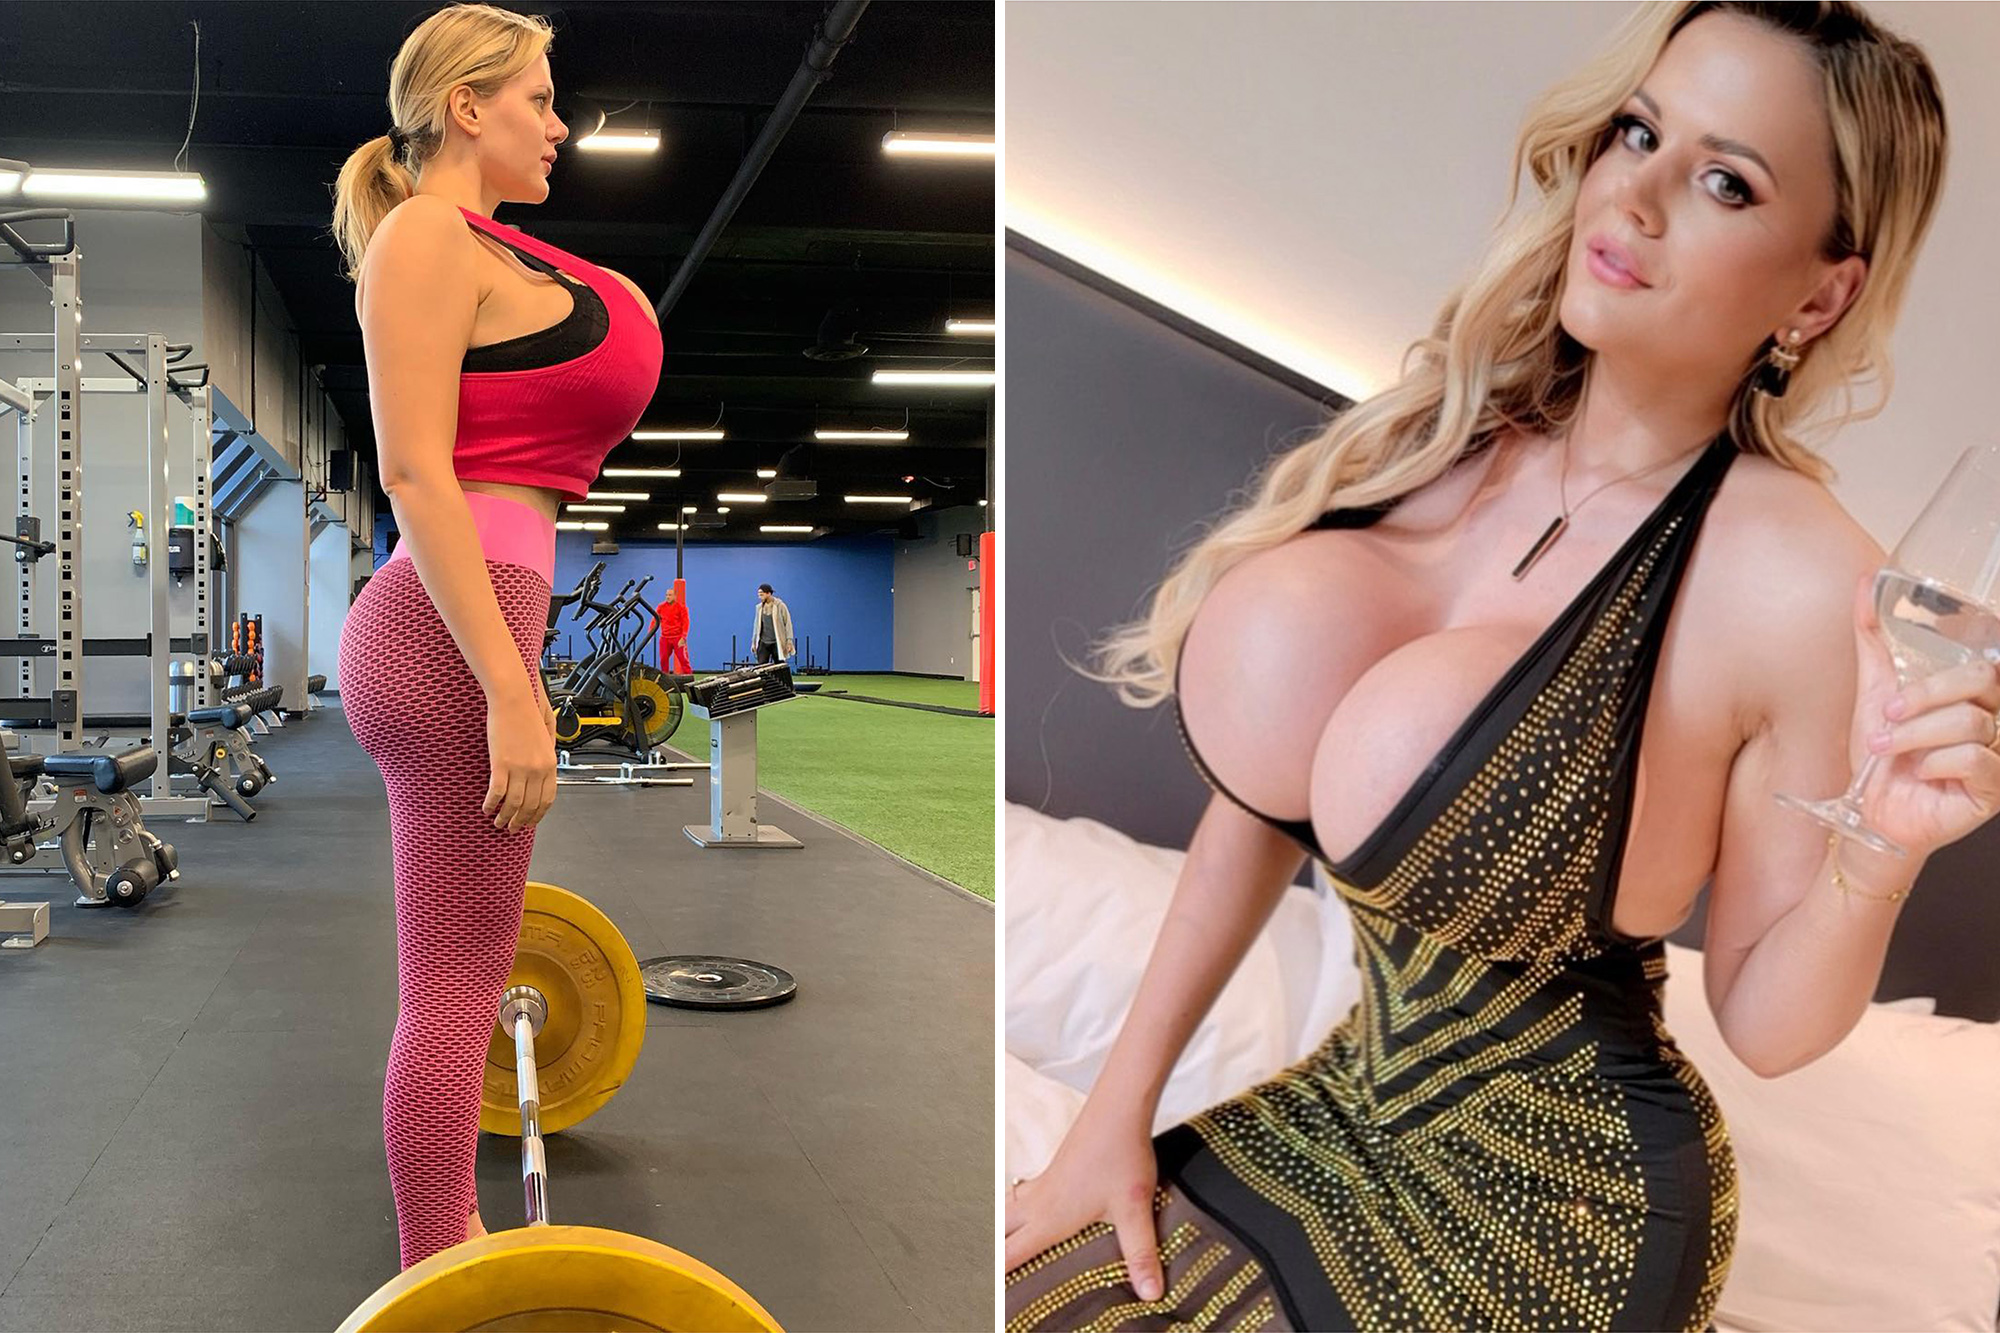 analiza aparece recommends fit women with big boobs pic